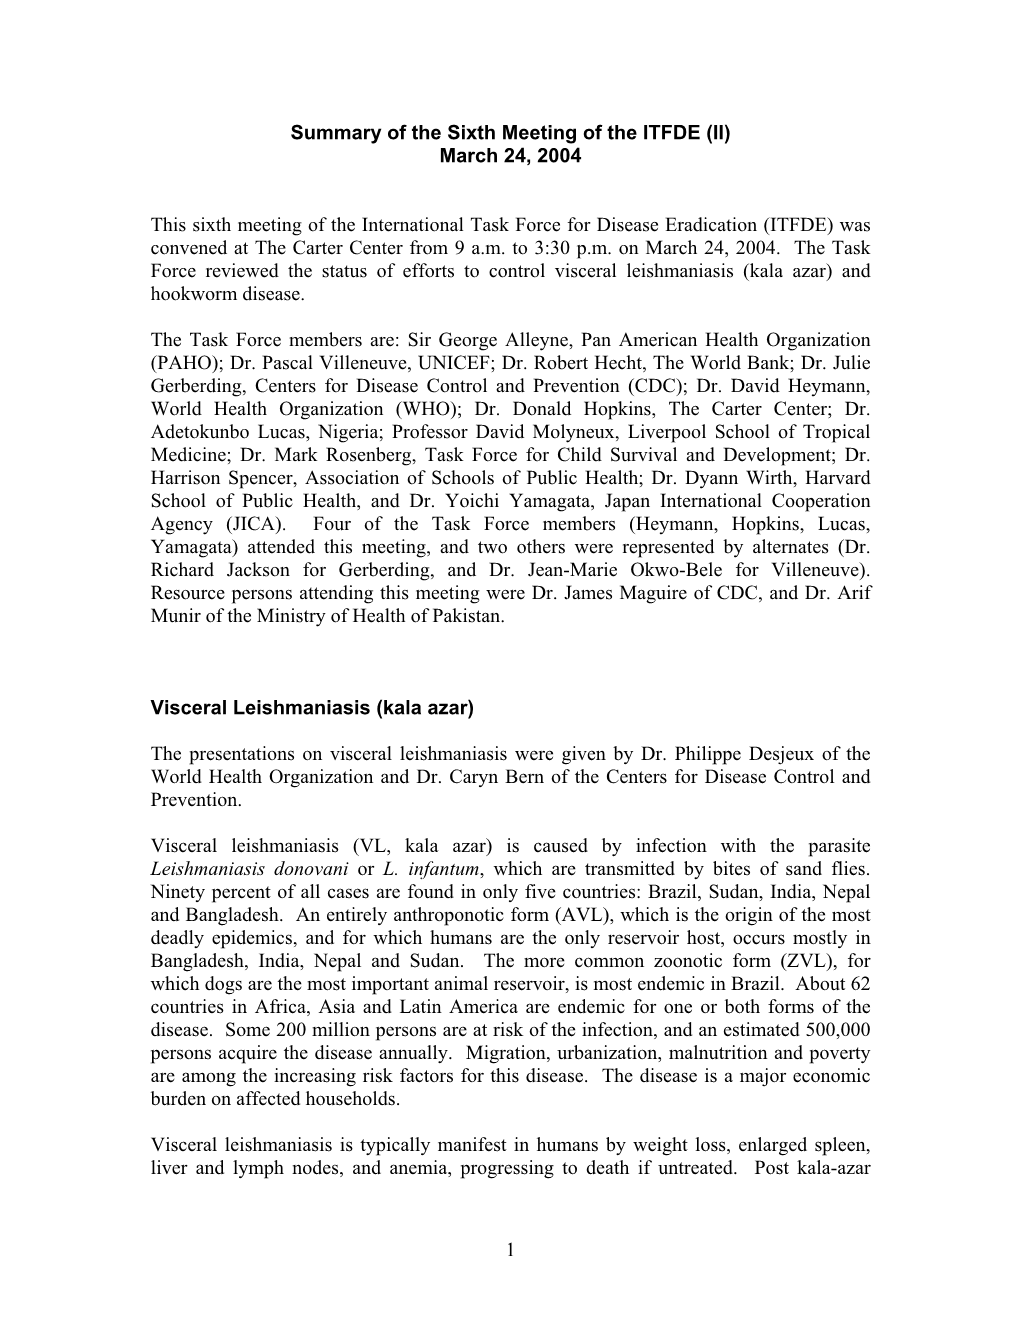 Summary of the Sixth Meeting of the ITFDE (II) March 24, 2004